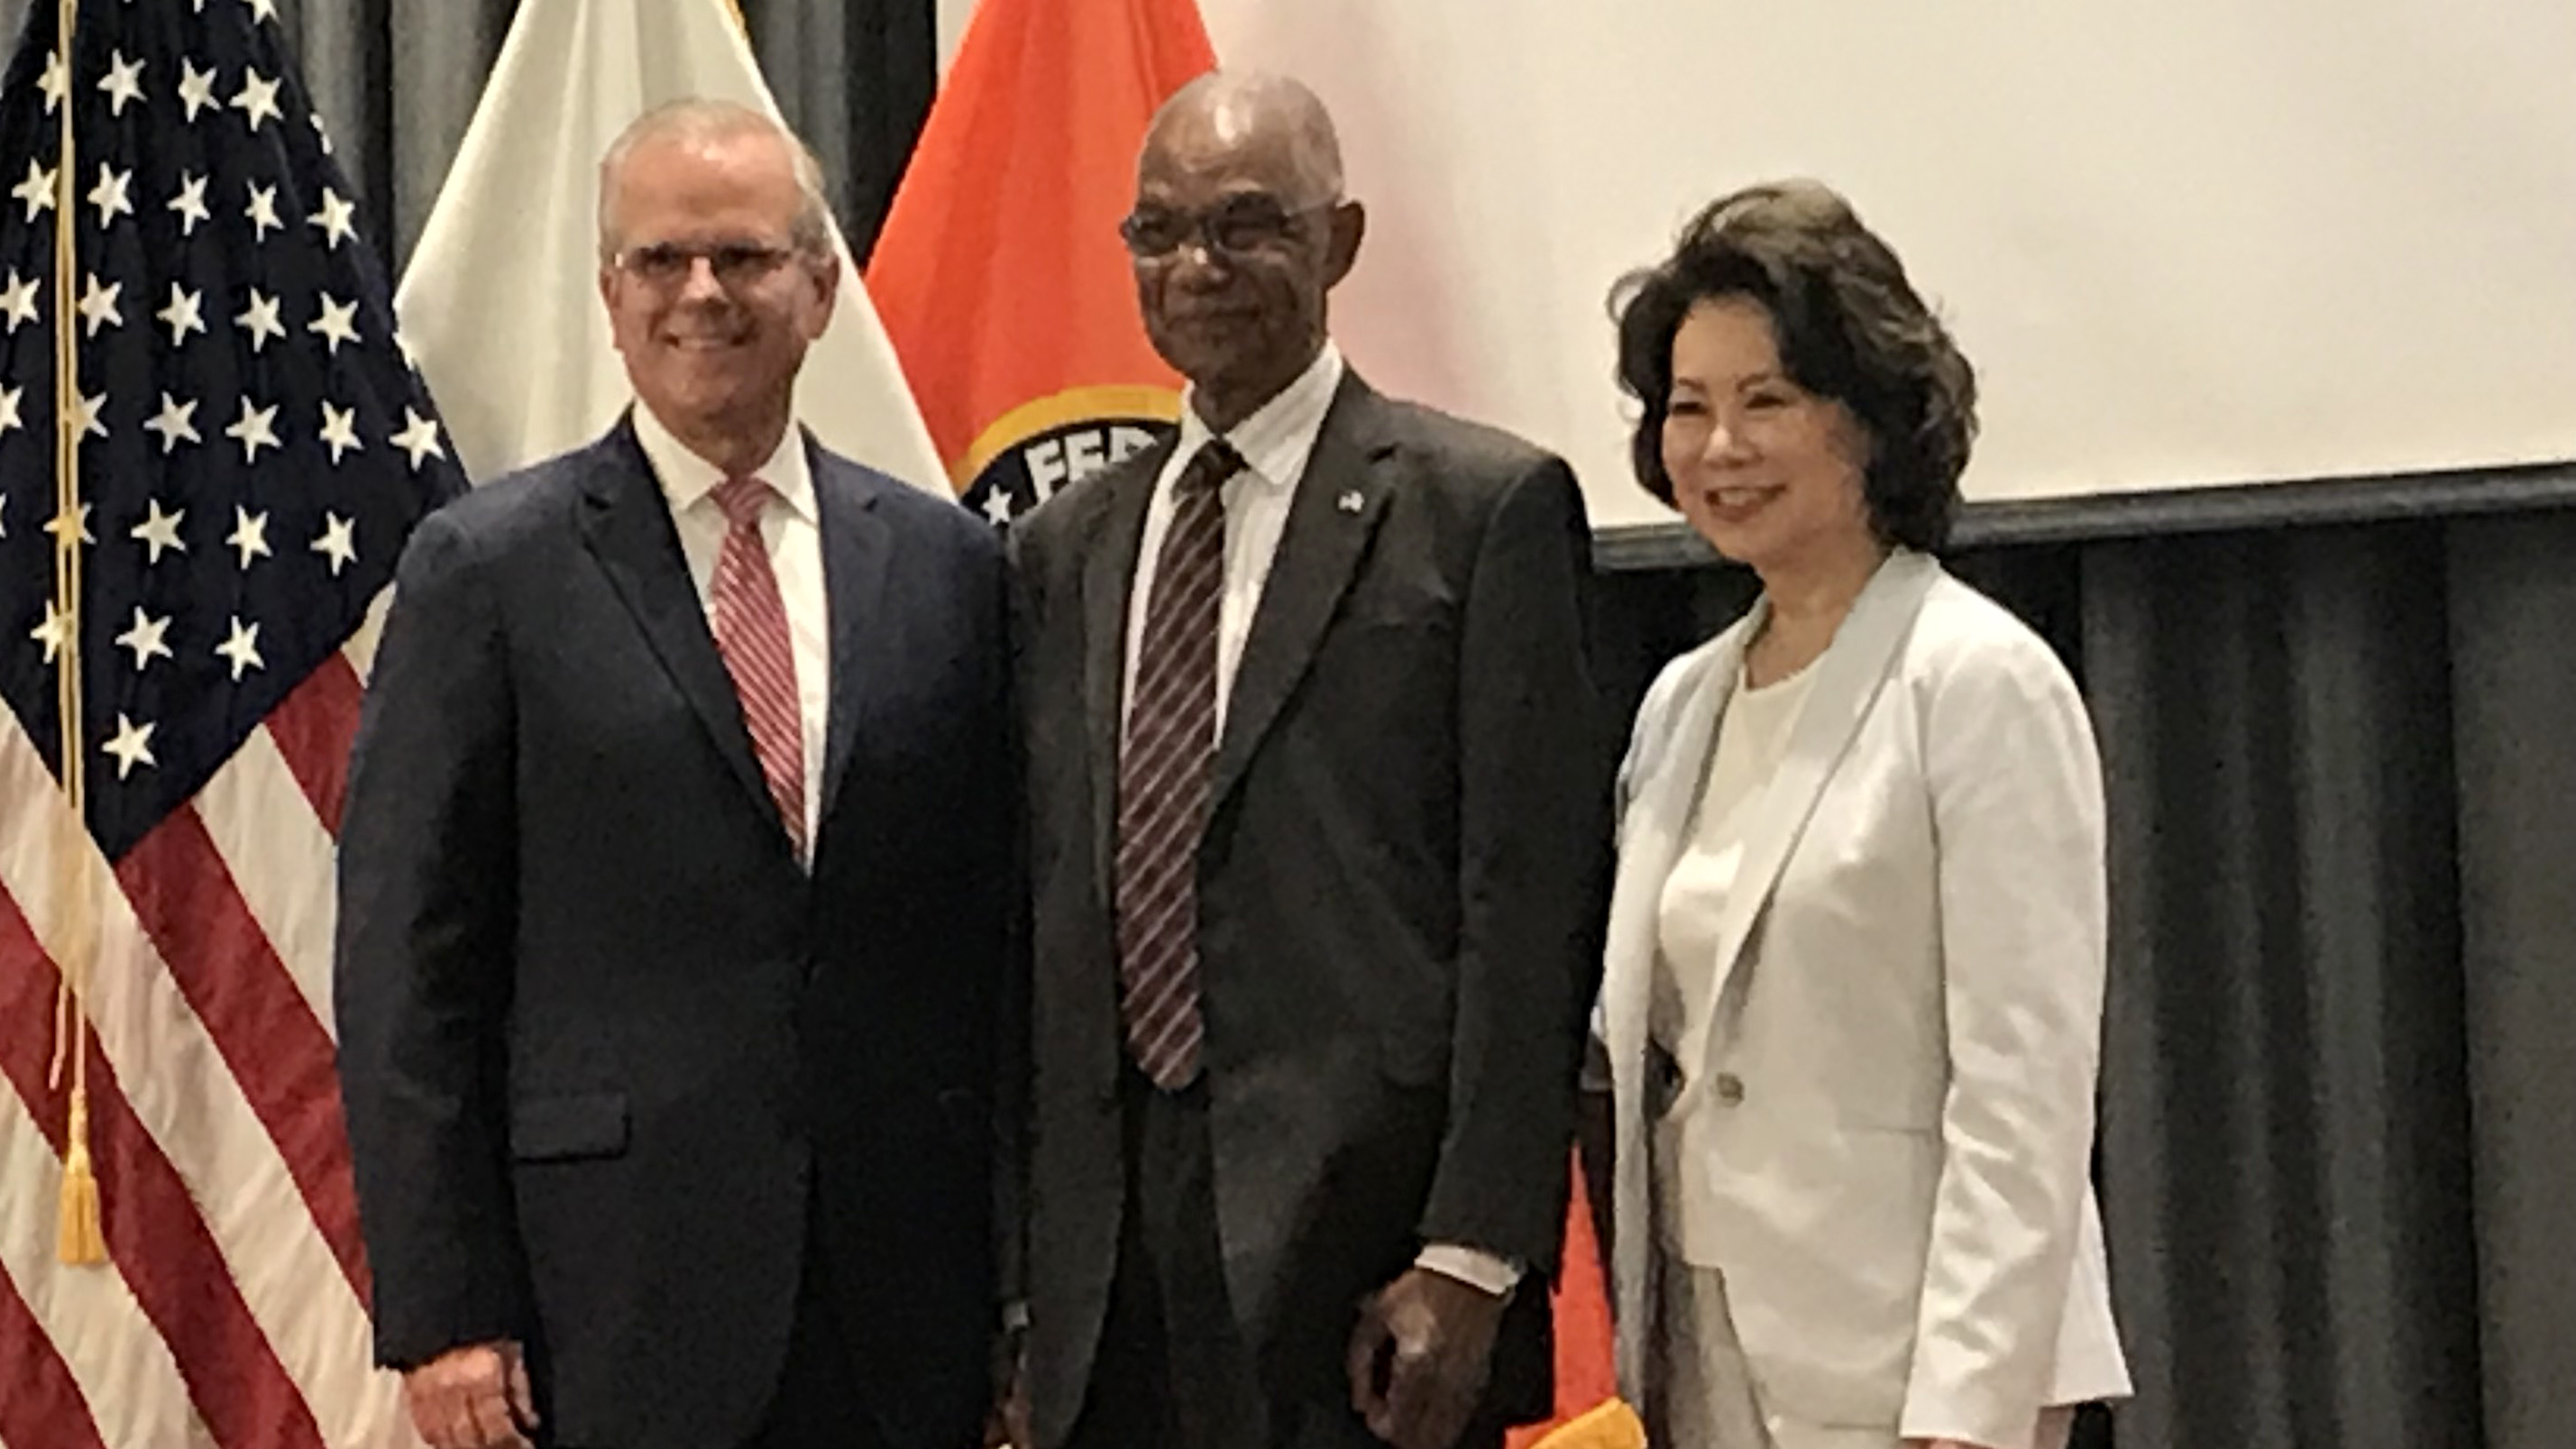 Acting FAA Administrator Daniel Elwell (left) and U.S. Secretary of Transportation Elaine Chao (right) honor Alphonso Barr for 61 years of service at the FAA. Photo by Richard McSpadden.